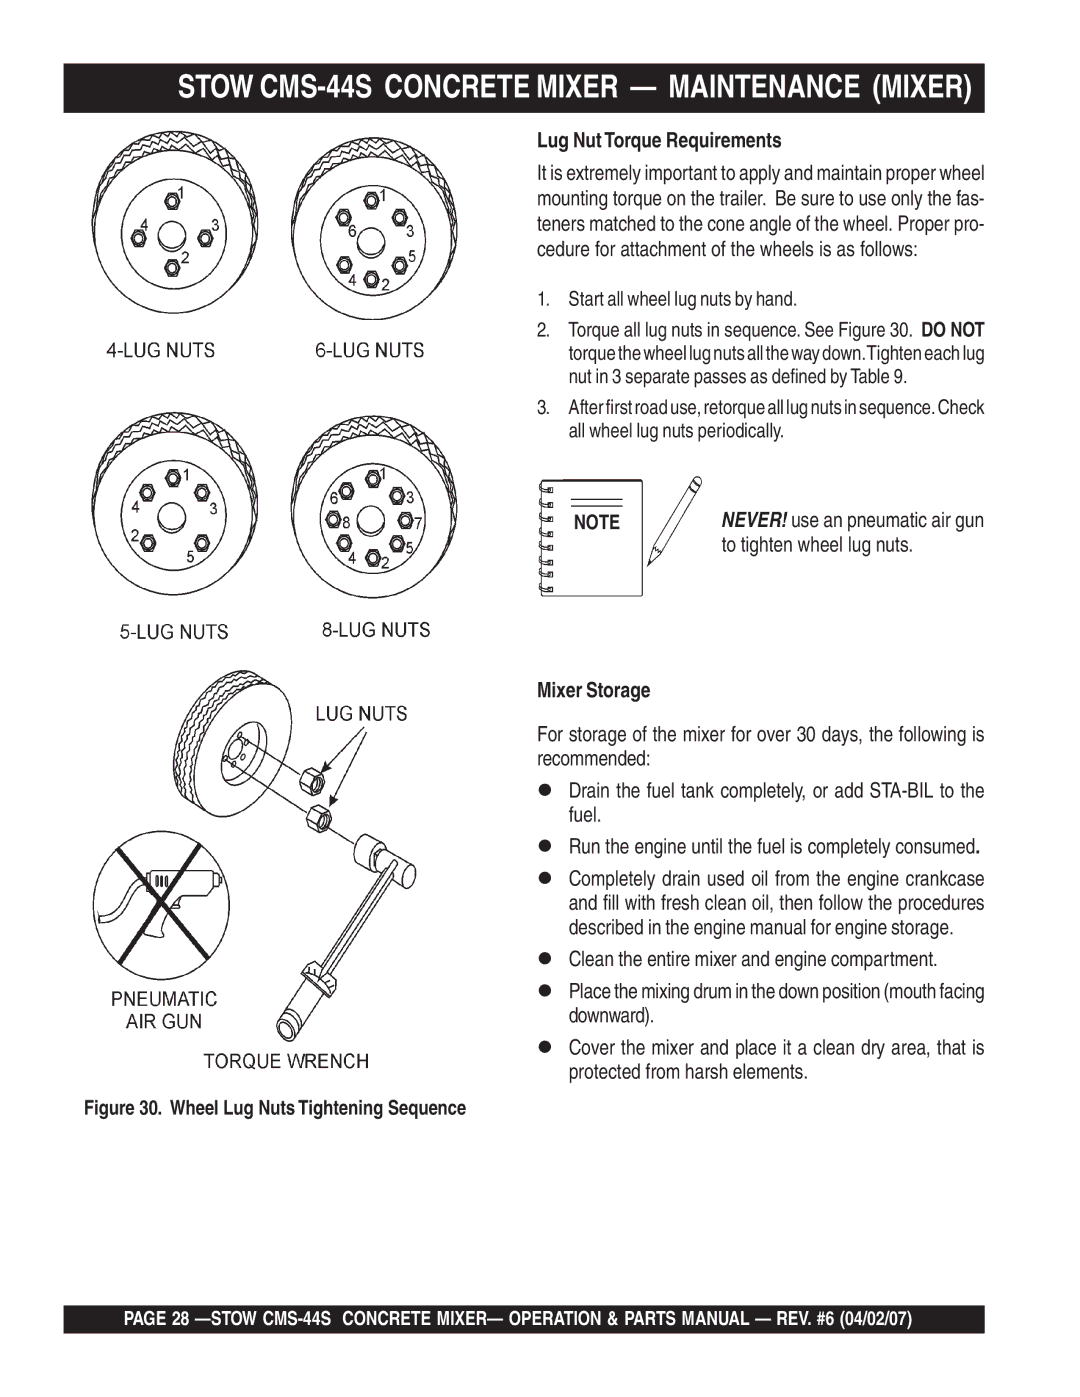 Stow CMS-44S manual To tighten wheel lug nuts 